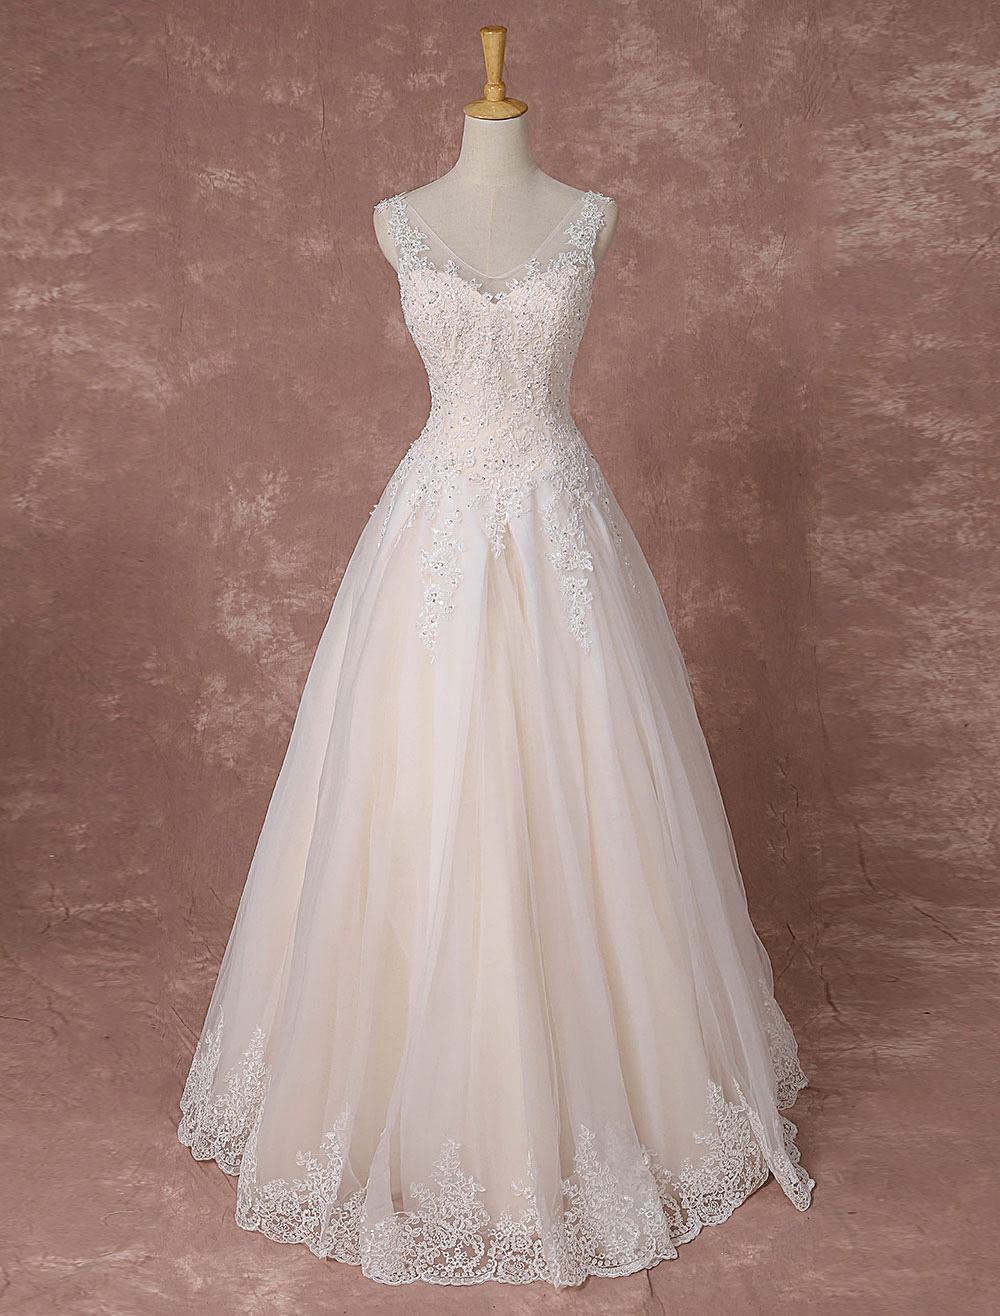 Champagne Lace Wedding Dress Backless Bridal Gown Floor-length A-line ...